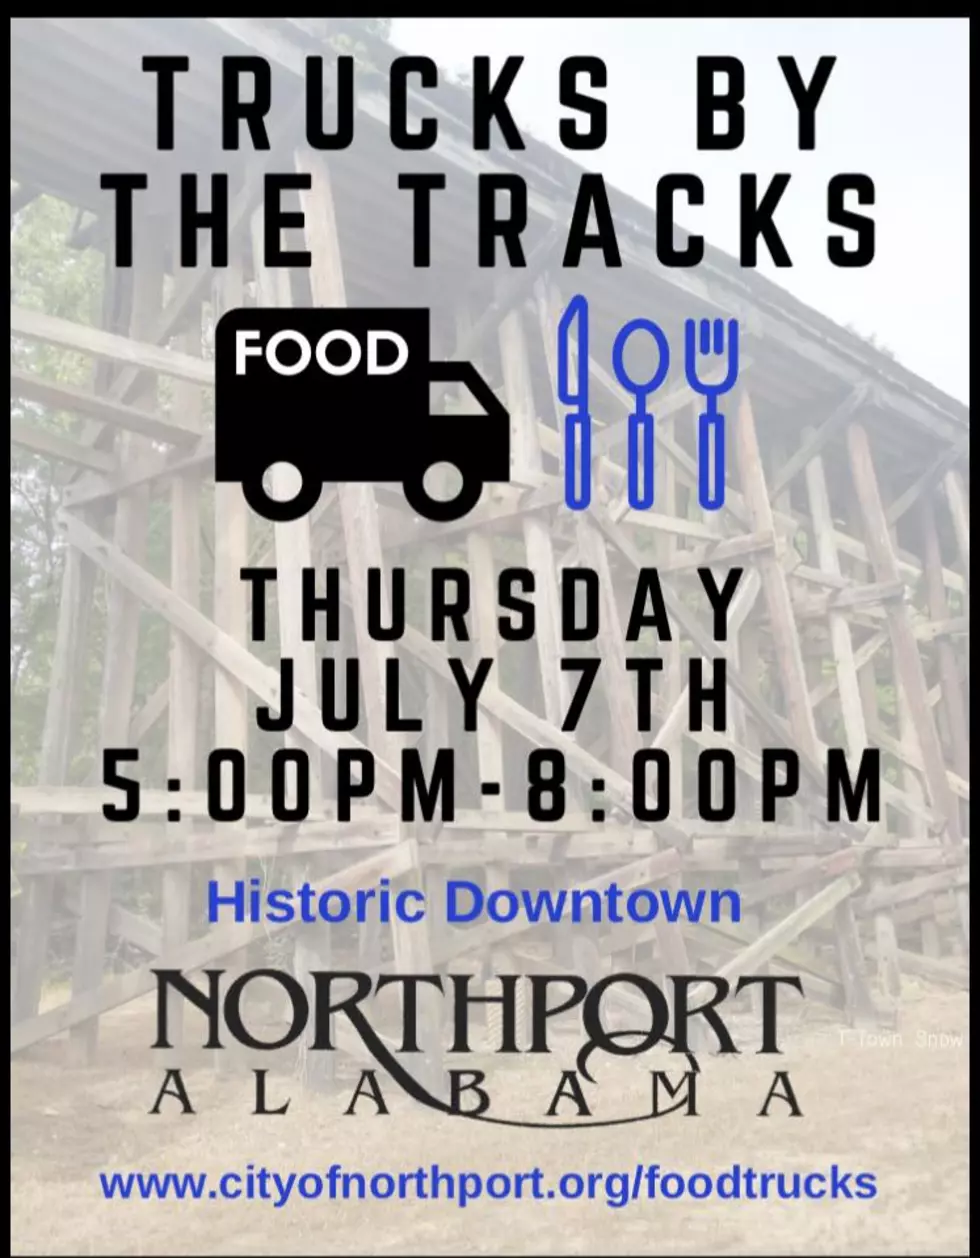 Trucks by the Tracks Returns to Northport for Dinner on Thursday, July 7th